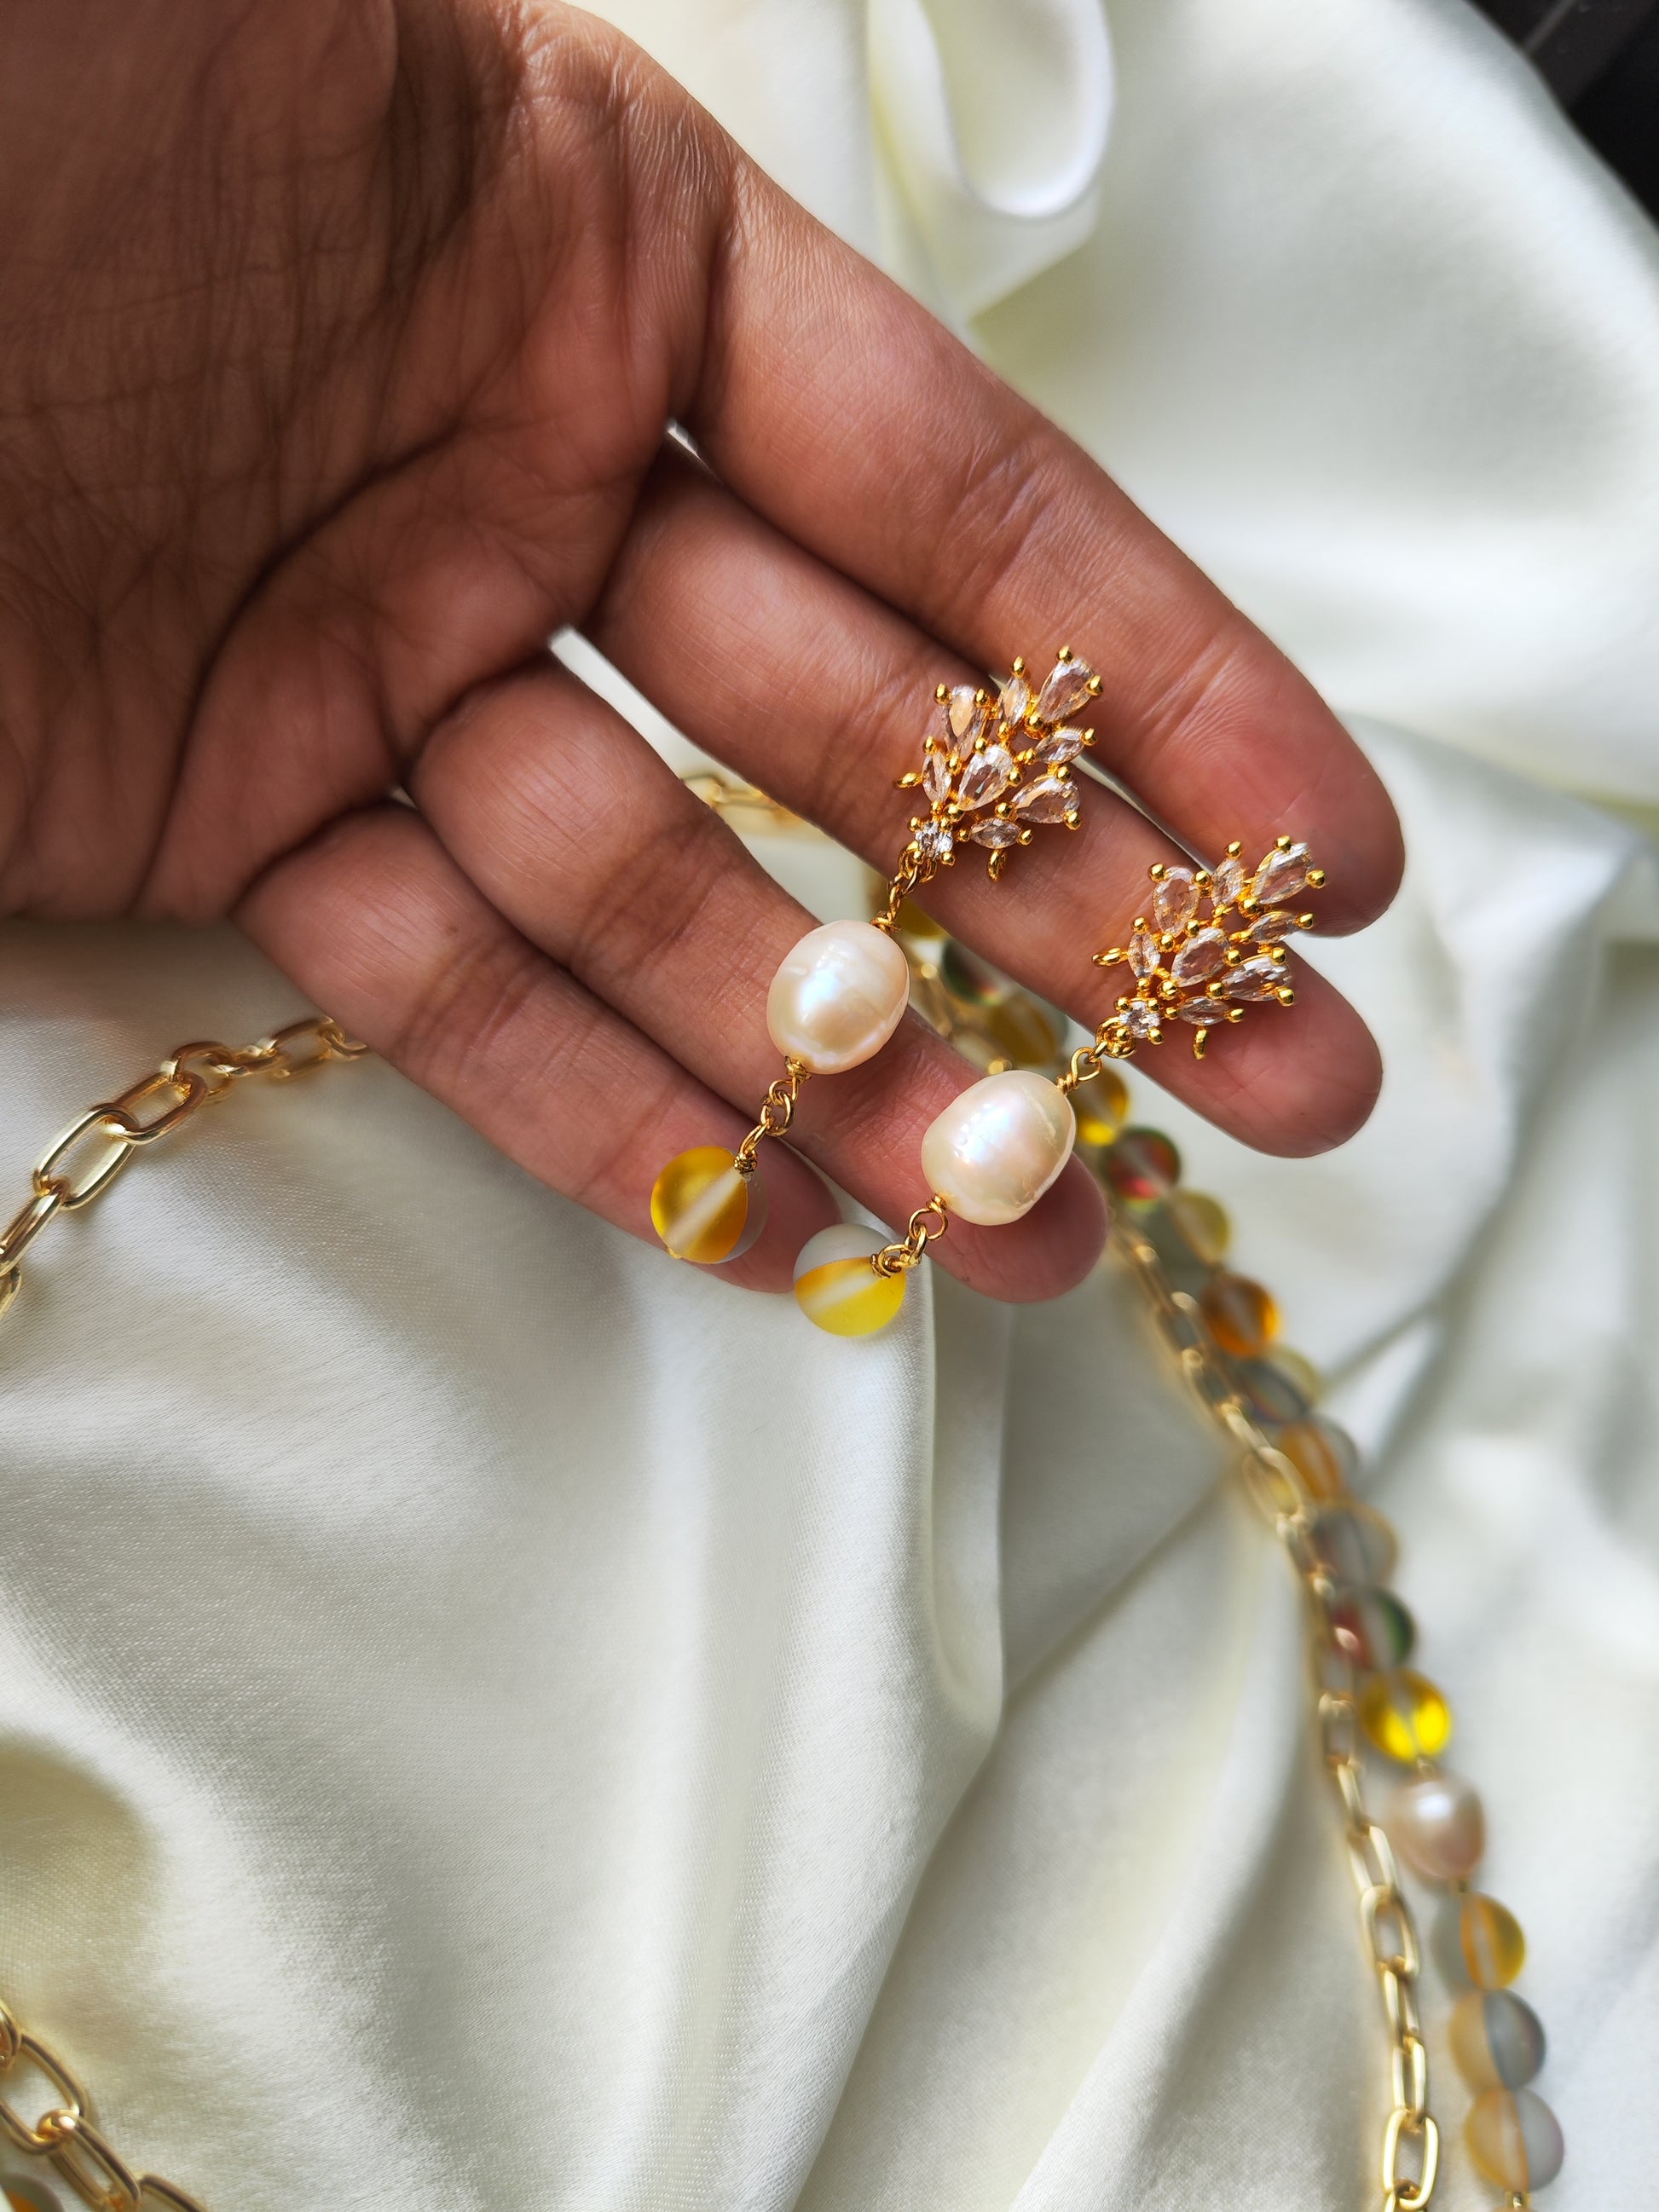 Add some shimmer to your look with the Juliet Beaded Jewelry set. Featuring mother of pearl beads, anti tarnish chains, and Yellow aura beads with CZ charms, this set is both stylish and durable. Shine bright with this unique and playful accessory. (No more jewelry-tarnishing woes for you!)